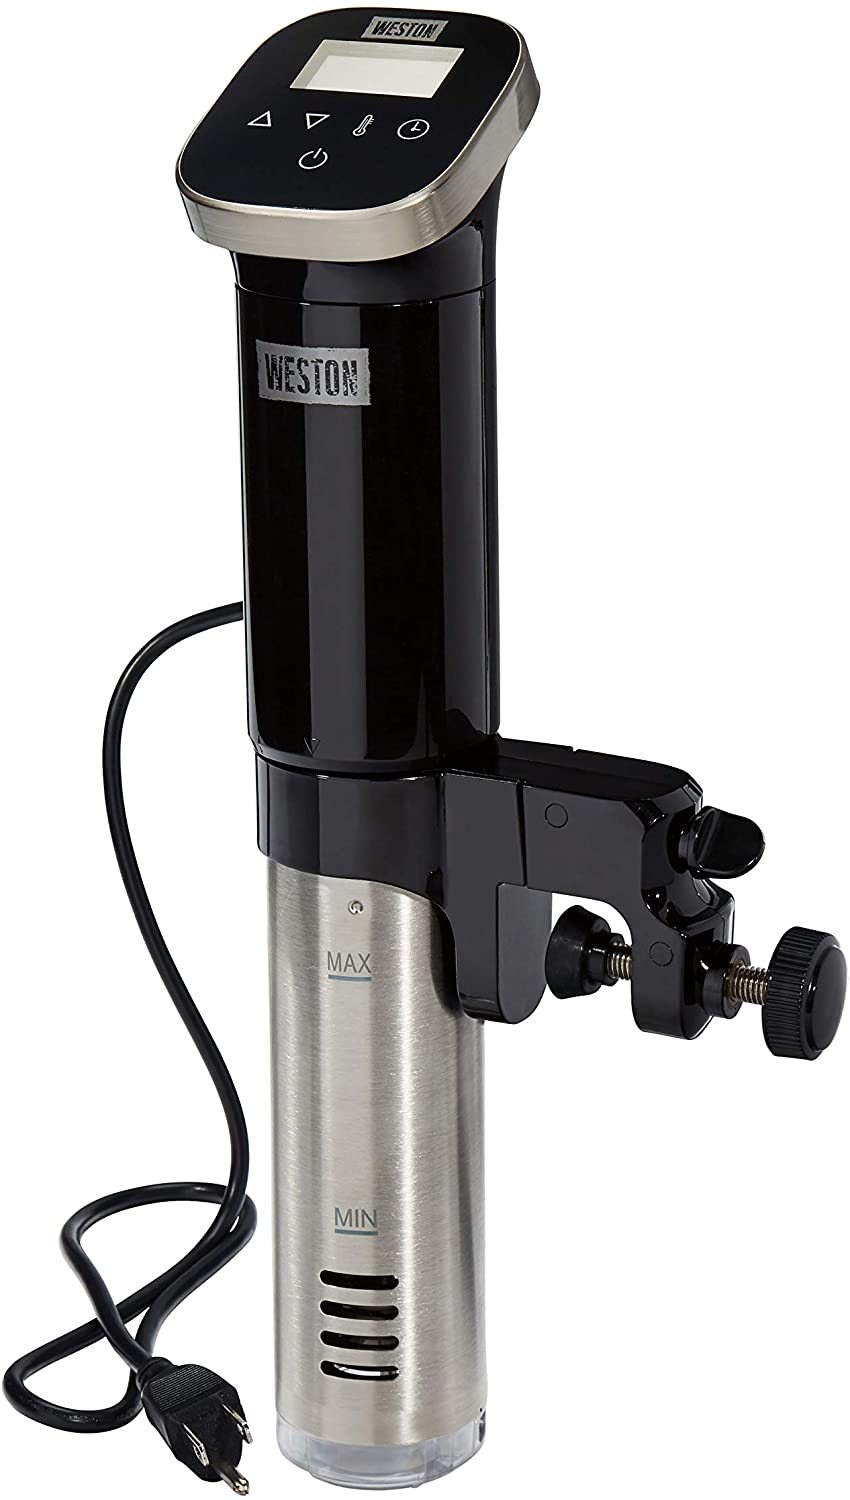 WESTON Sous Vide Immersion Circulator - Factory serviced with Home Essentials warranty - 36200